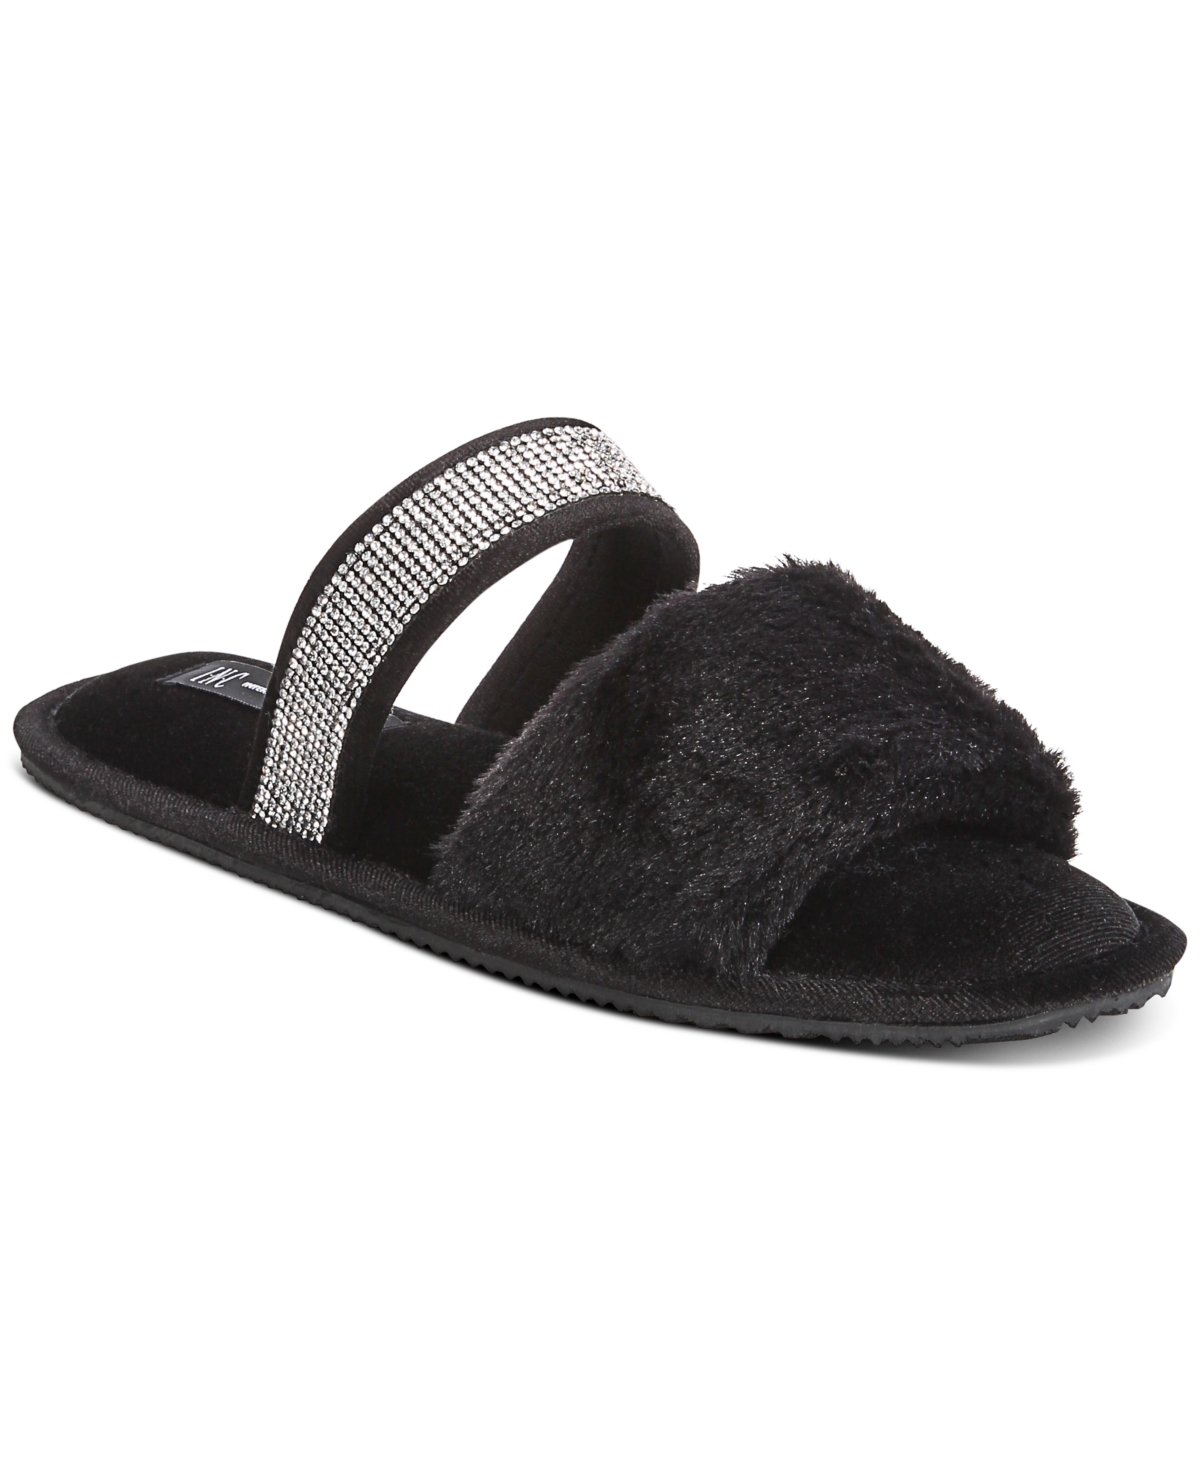 I.N.C. International Concepts Women's Double-Strap Slide Slippers (White or Black) $5.16 + Free Store Pickup at Macy's or FS on $25+